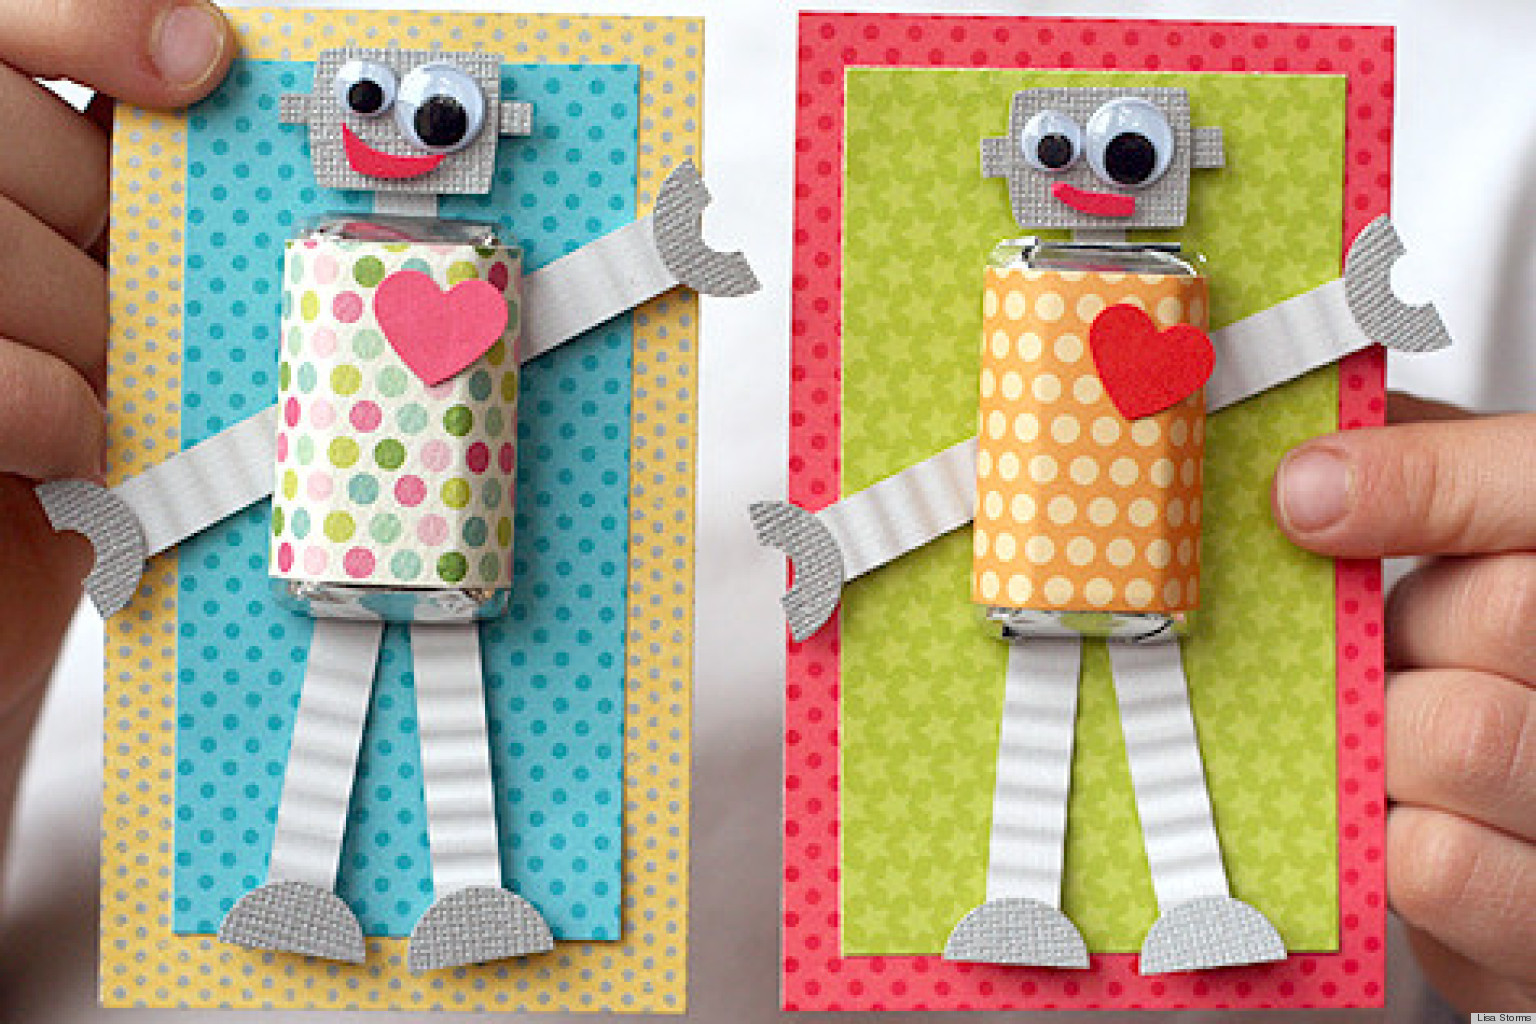 Homemade Projects For Kids
 Valentine s Day Ideas Make These Adorable DIY Robot Cards